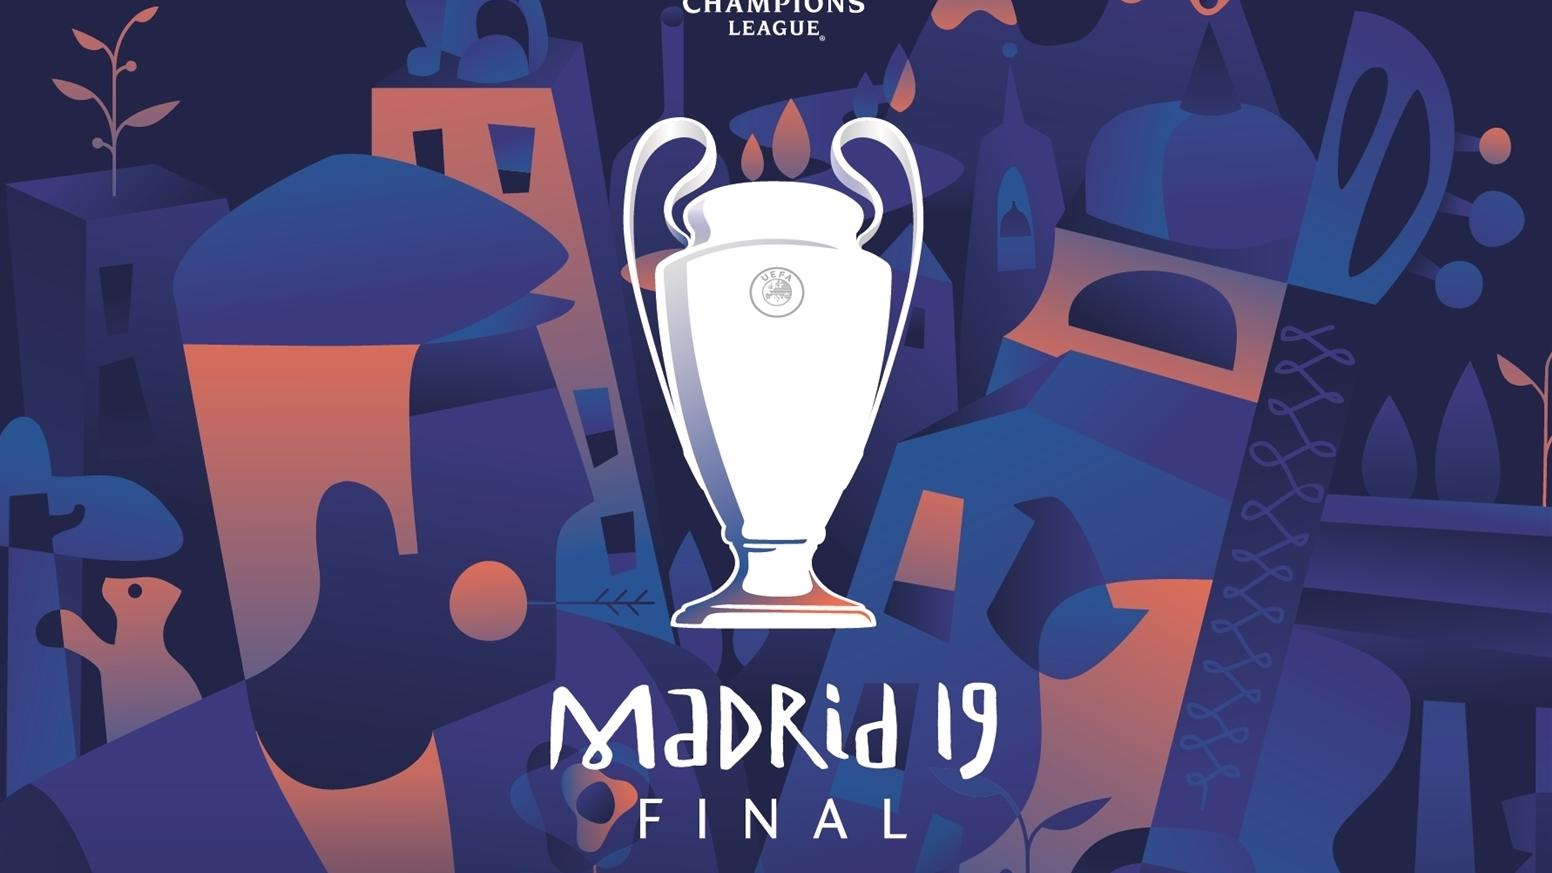 tickets to the champions league final 2019